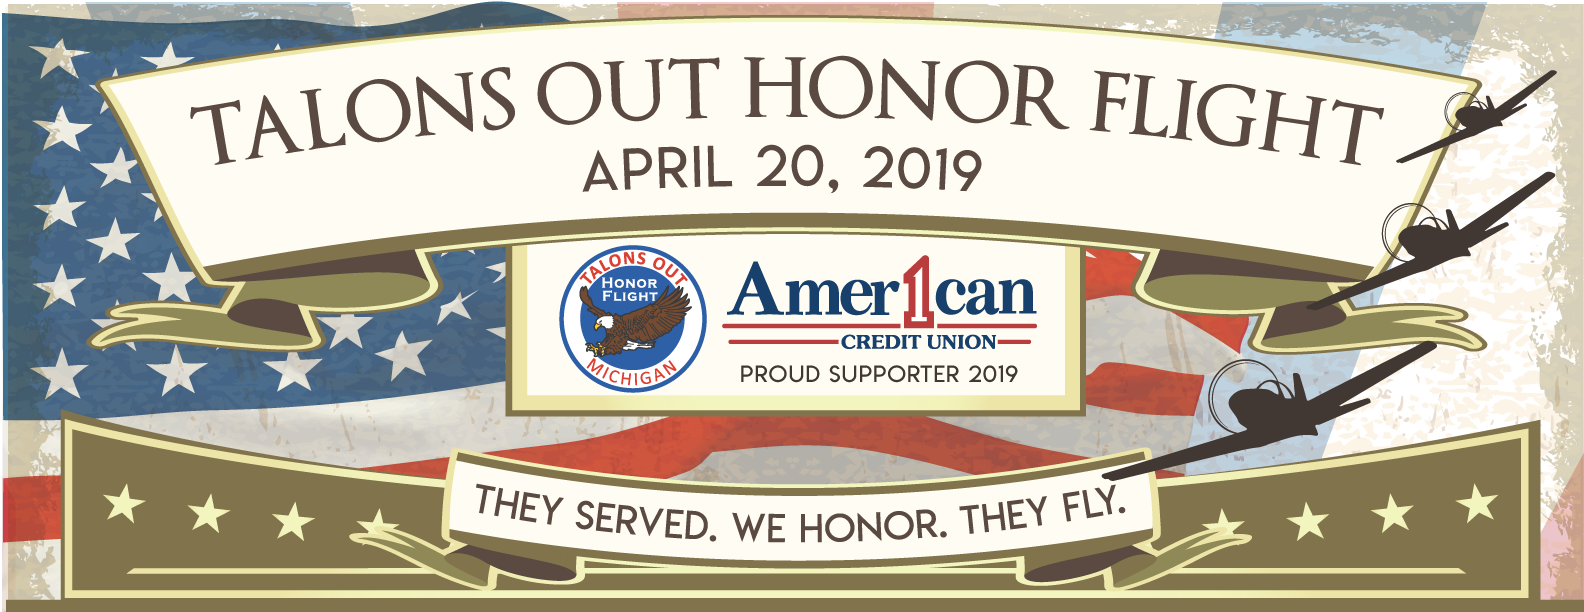 American 1 Credit Union is a proud sponsor of the 2019 Talons Out Honor Flight's Welcome Back Party